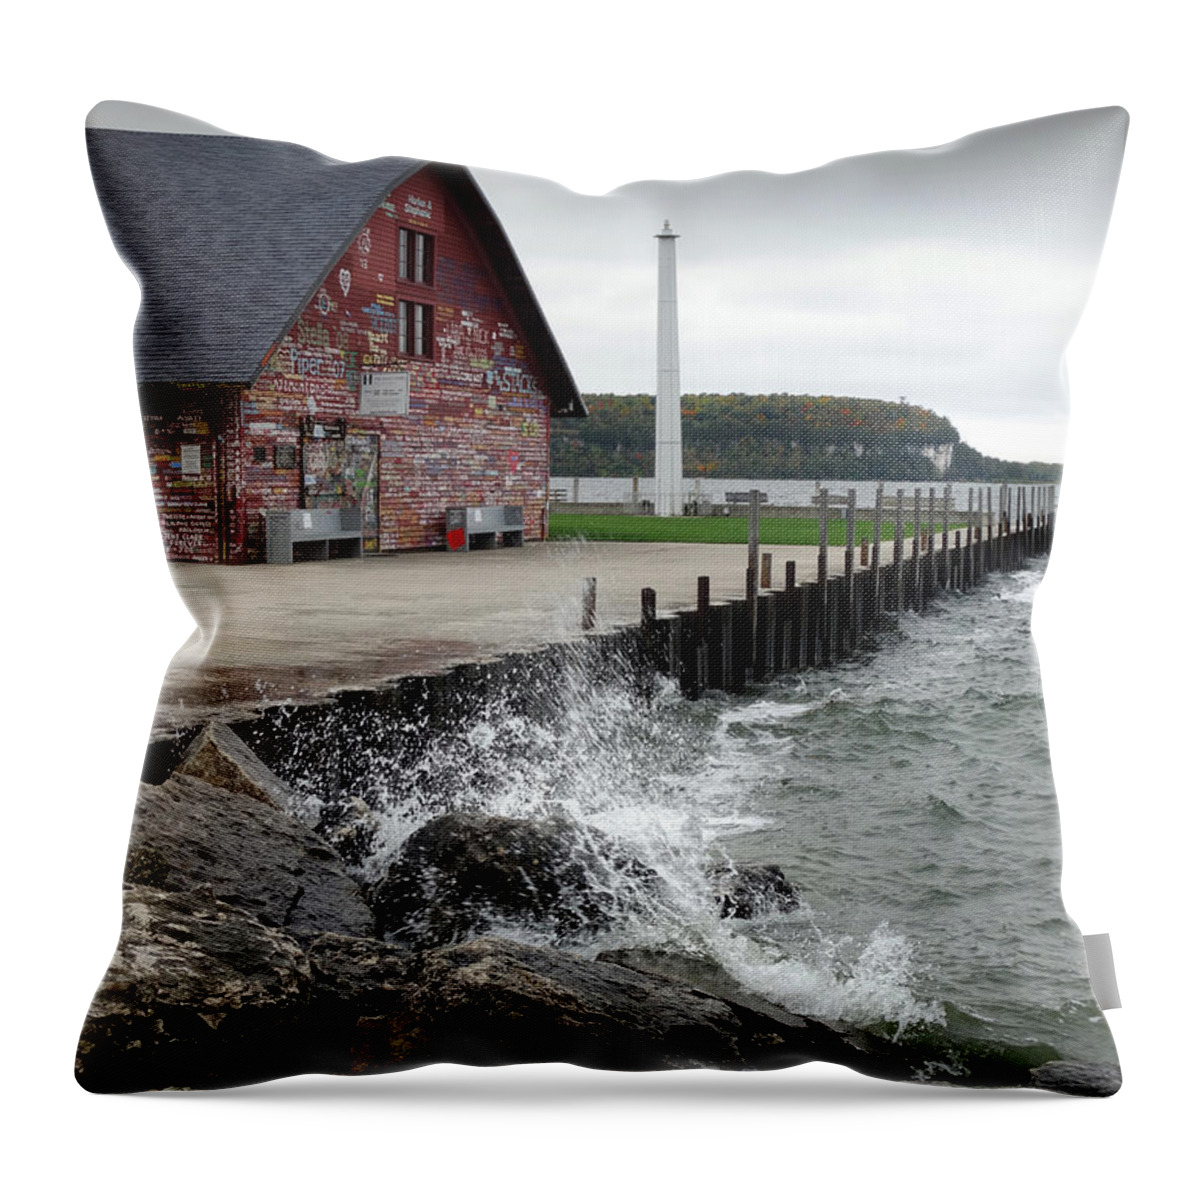 Anderson Dock Throw Pillow featuring the photograph Anderson Dock Splash by David T Wilkinson